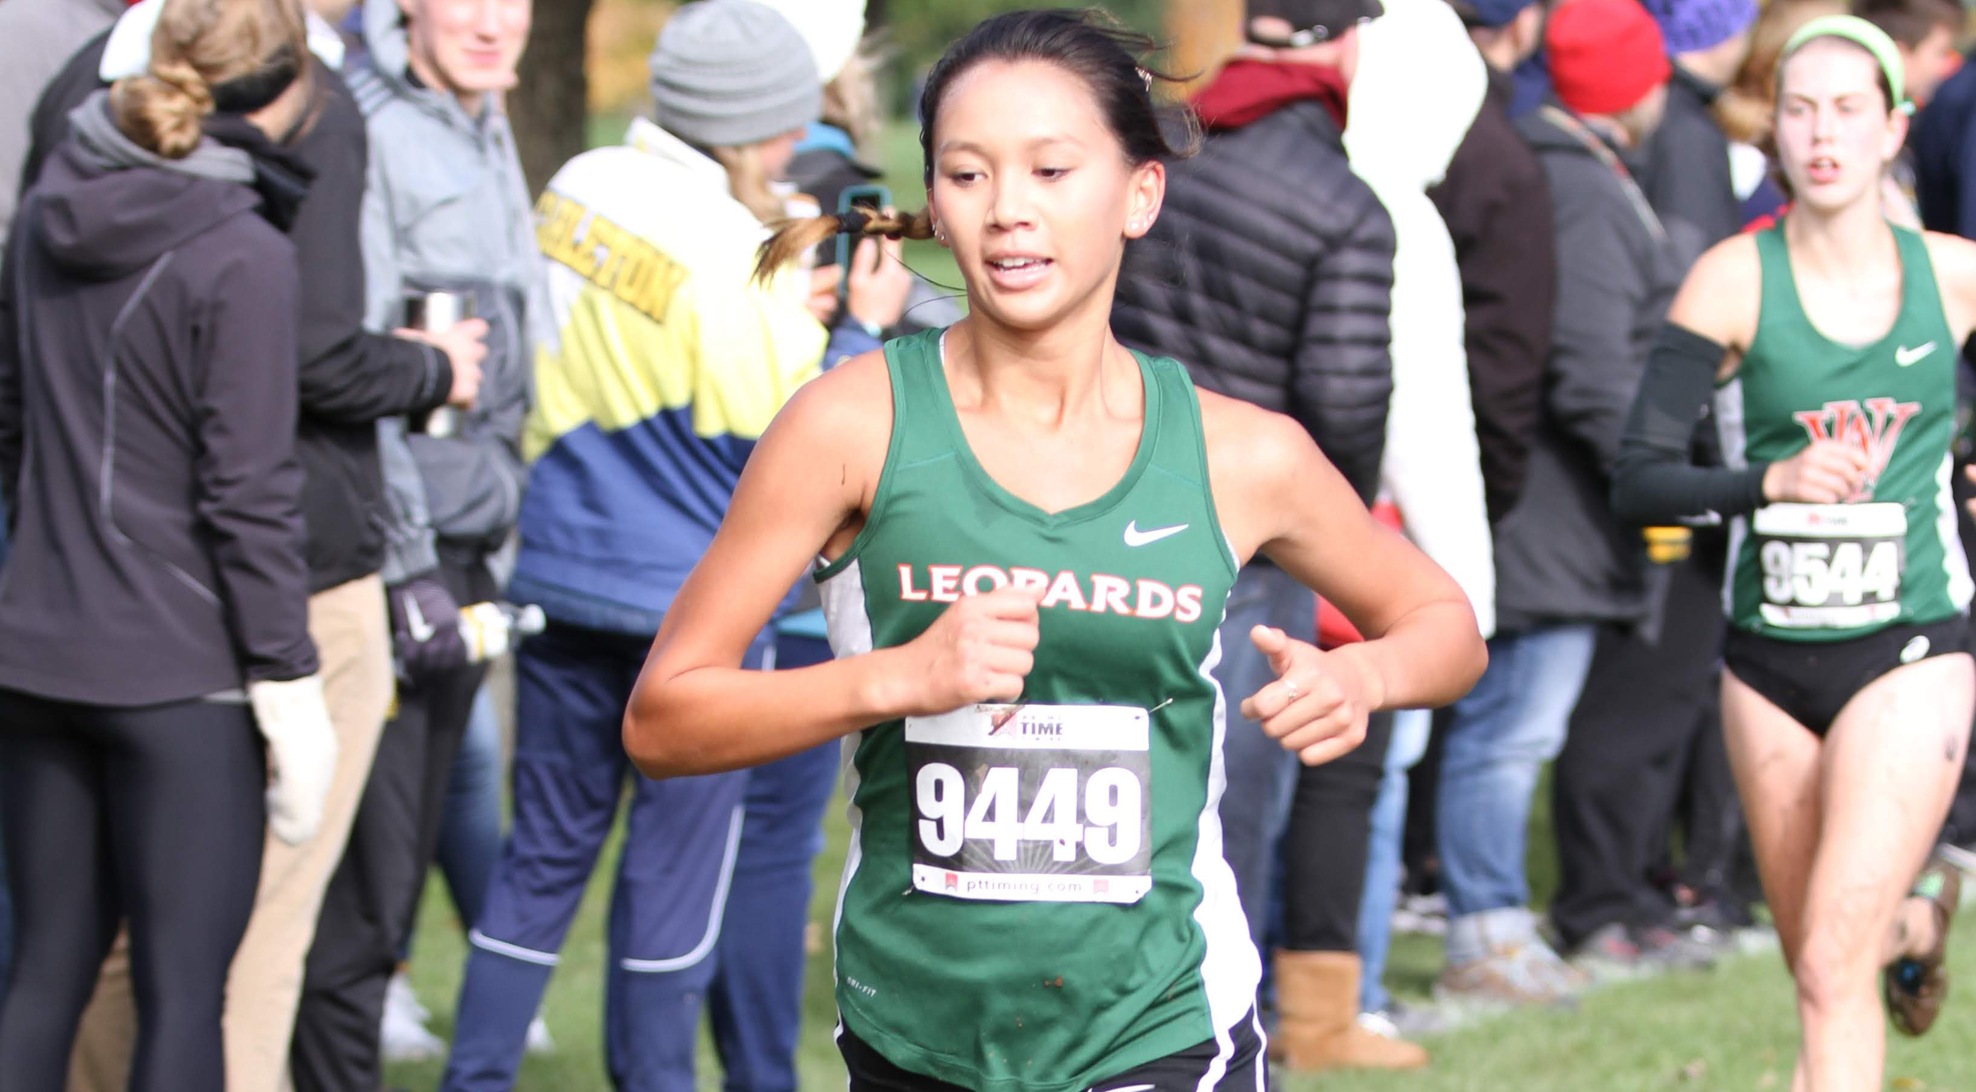 Cerrillos Leads Leopards at Pre-Nationals